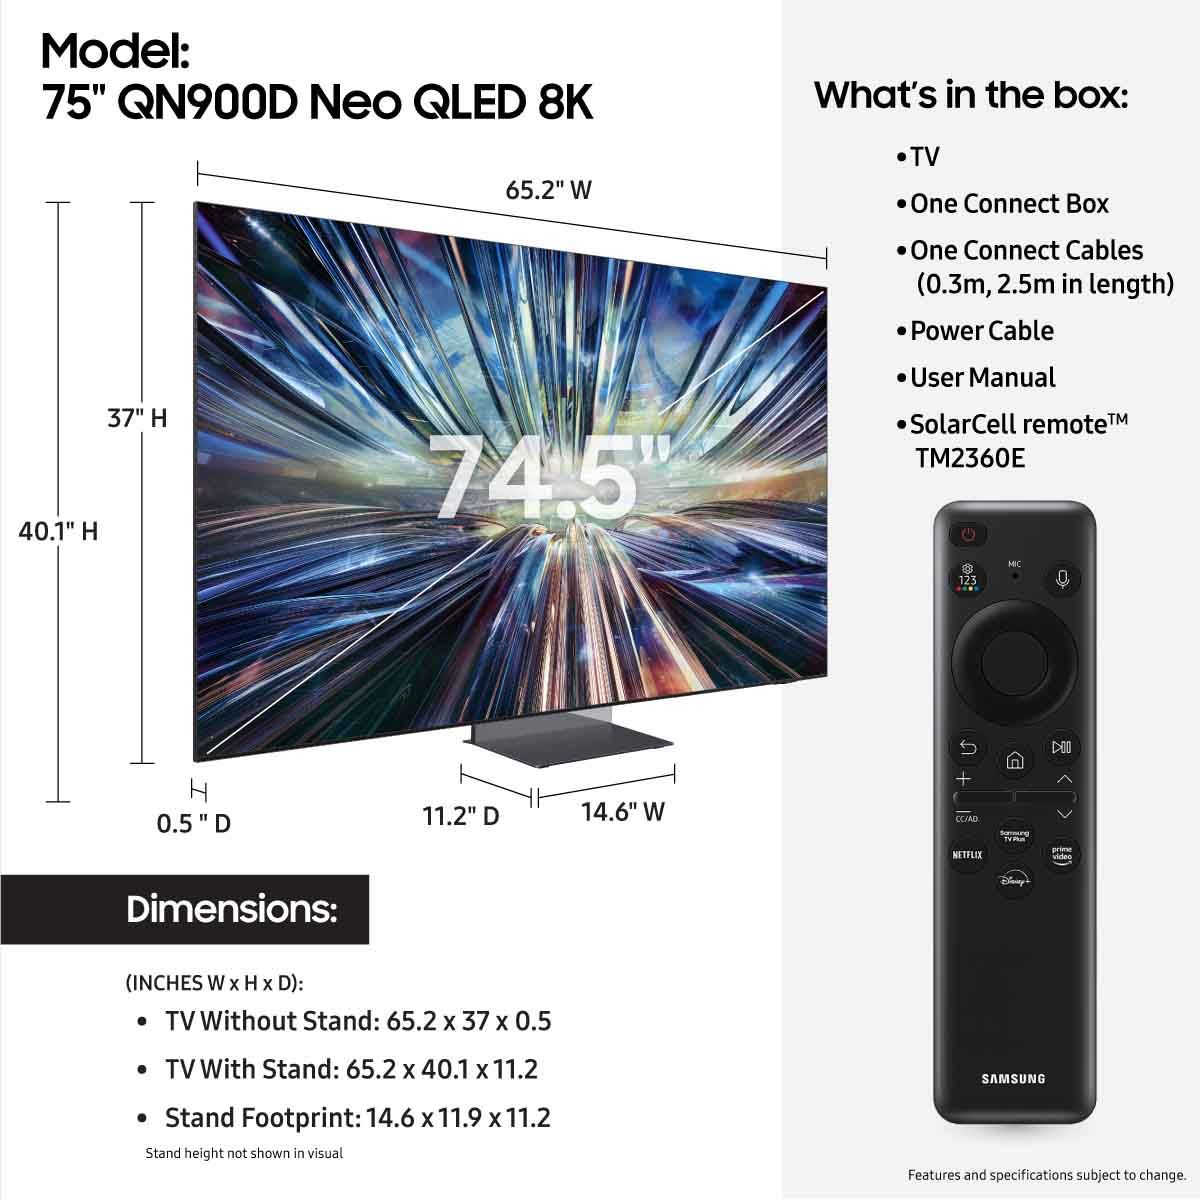 Samsung QN900D Neo QLED 8K Smart TV - 75" - dimensions and what's in the box